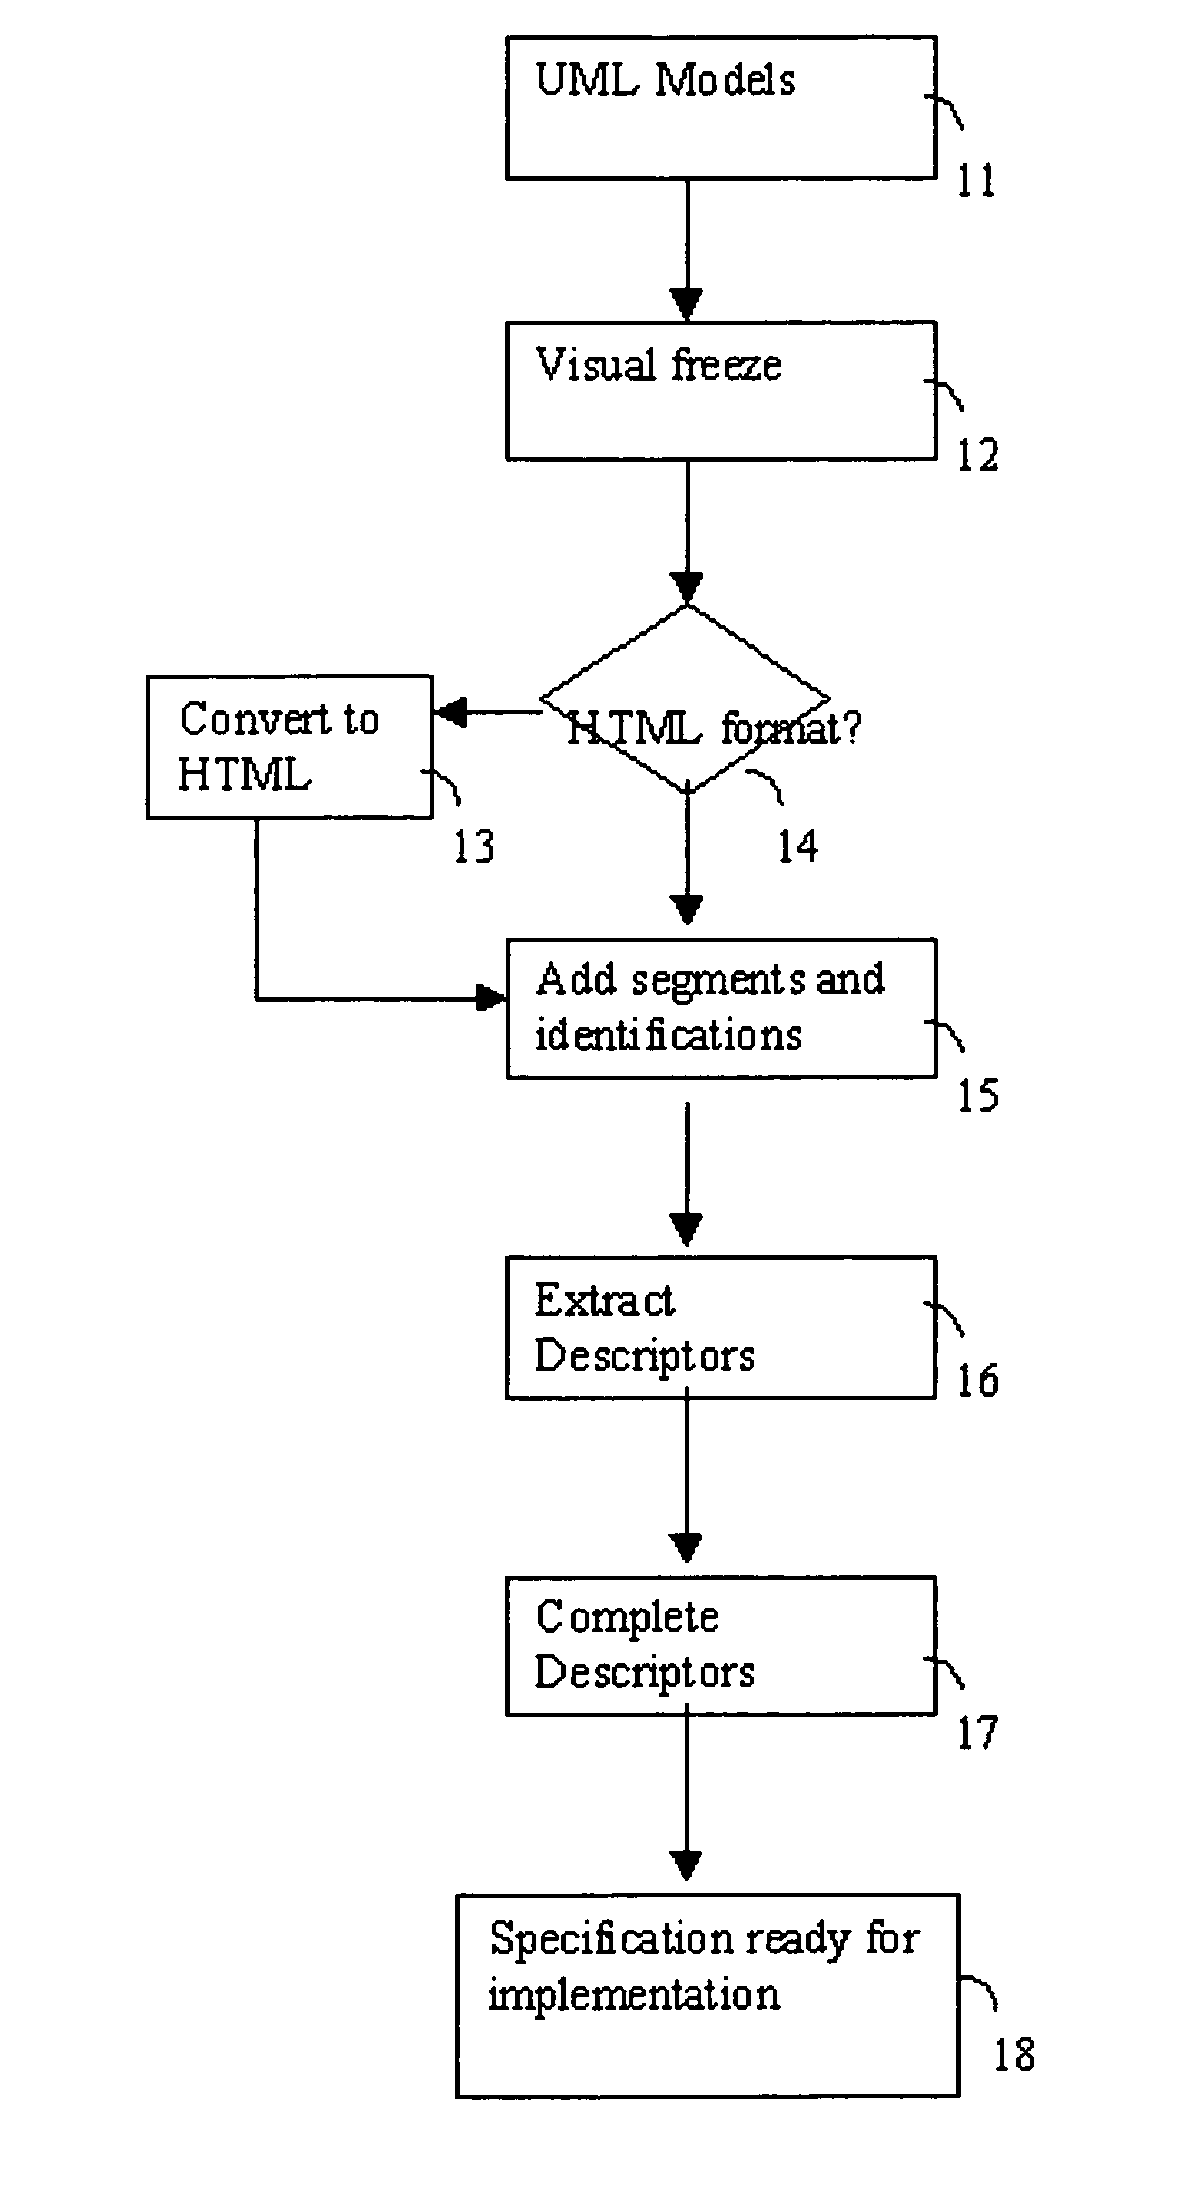 System and method for specification and implementation of MVC (model-view-controller) based web applications